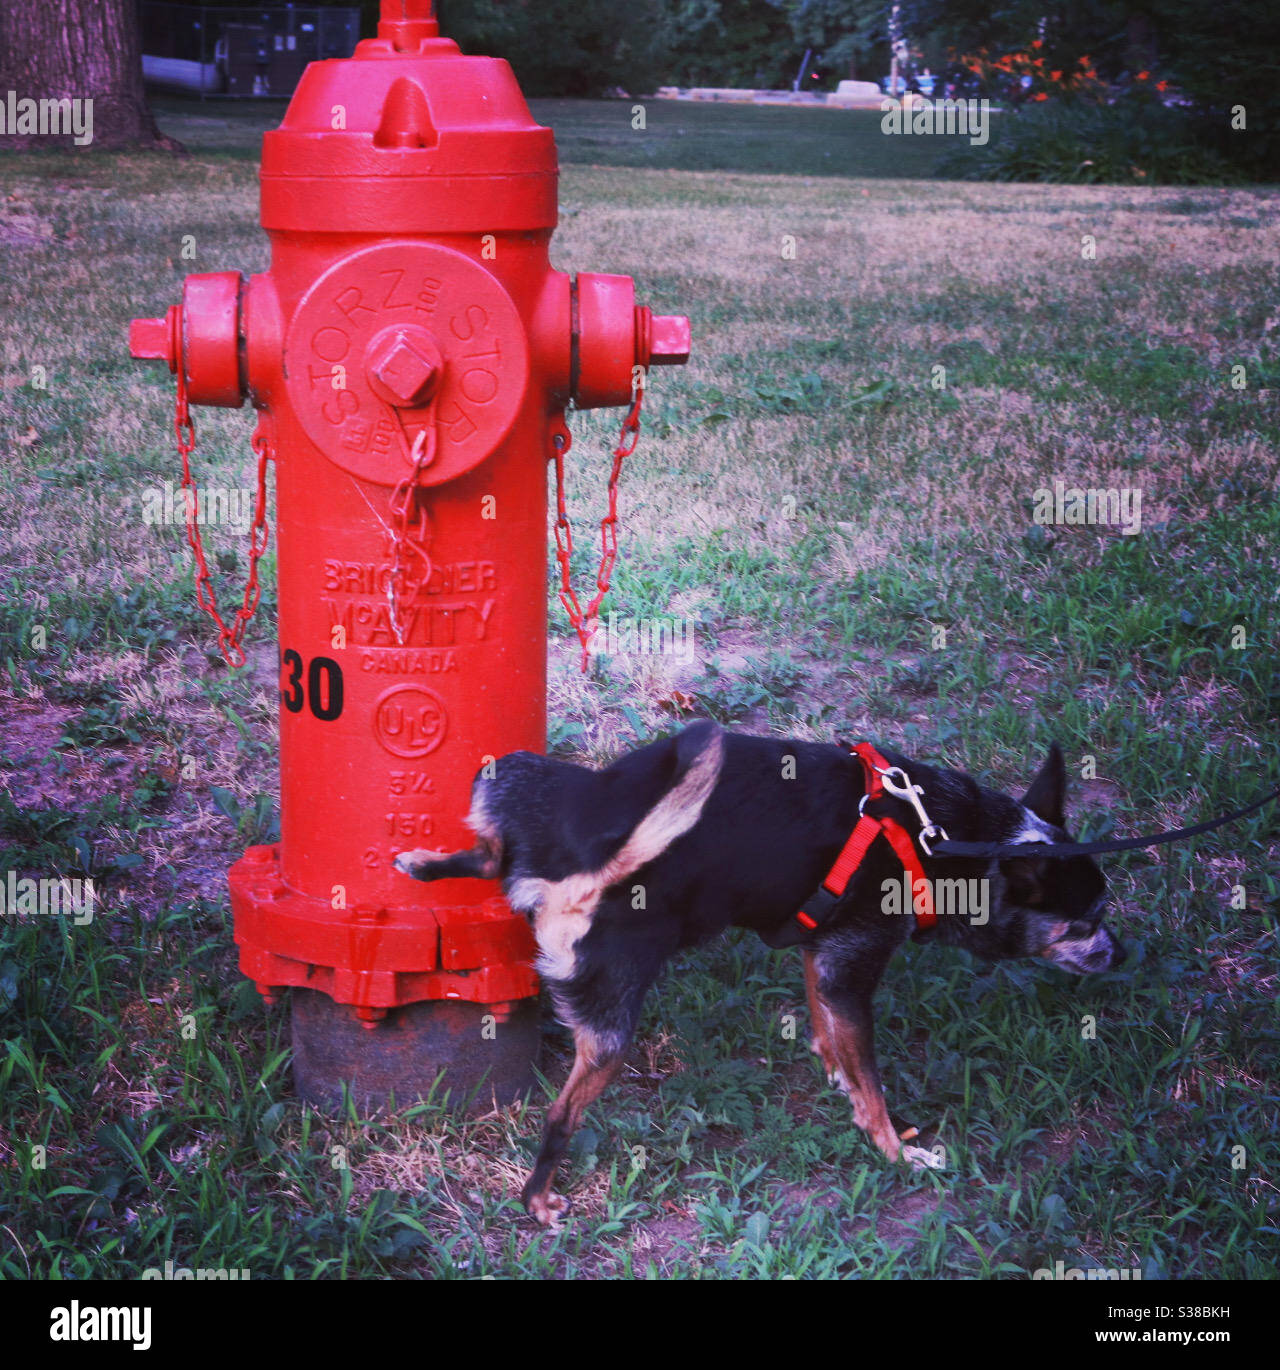 Dog peeing on fire hydrant Stock Photo